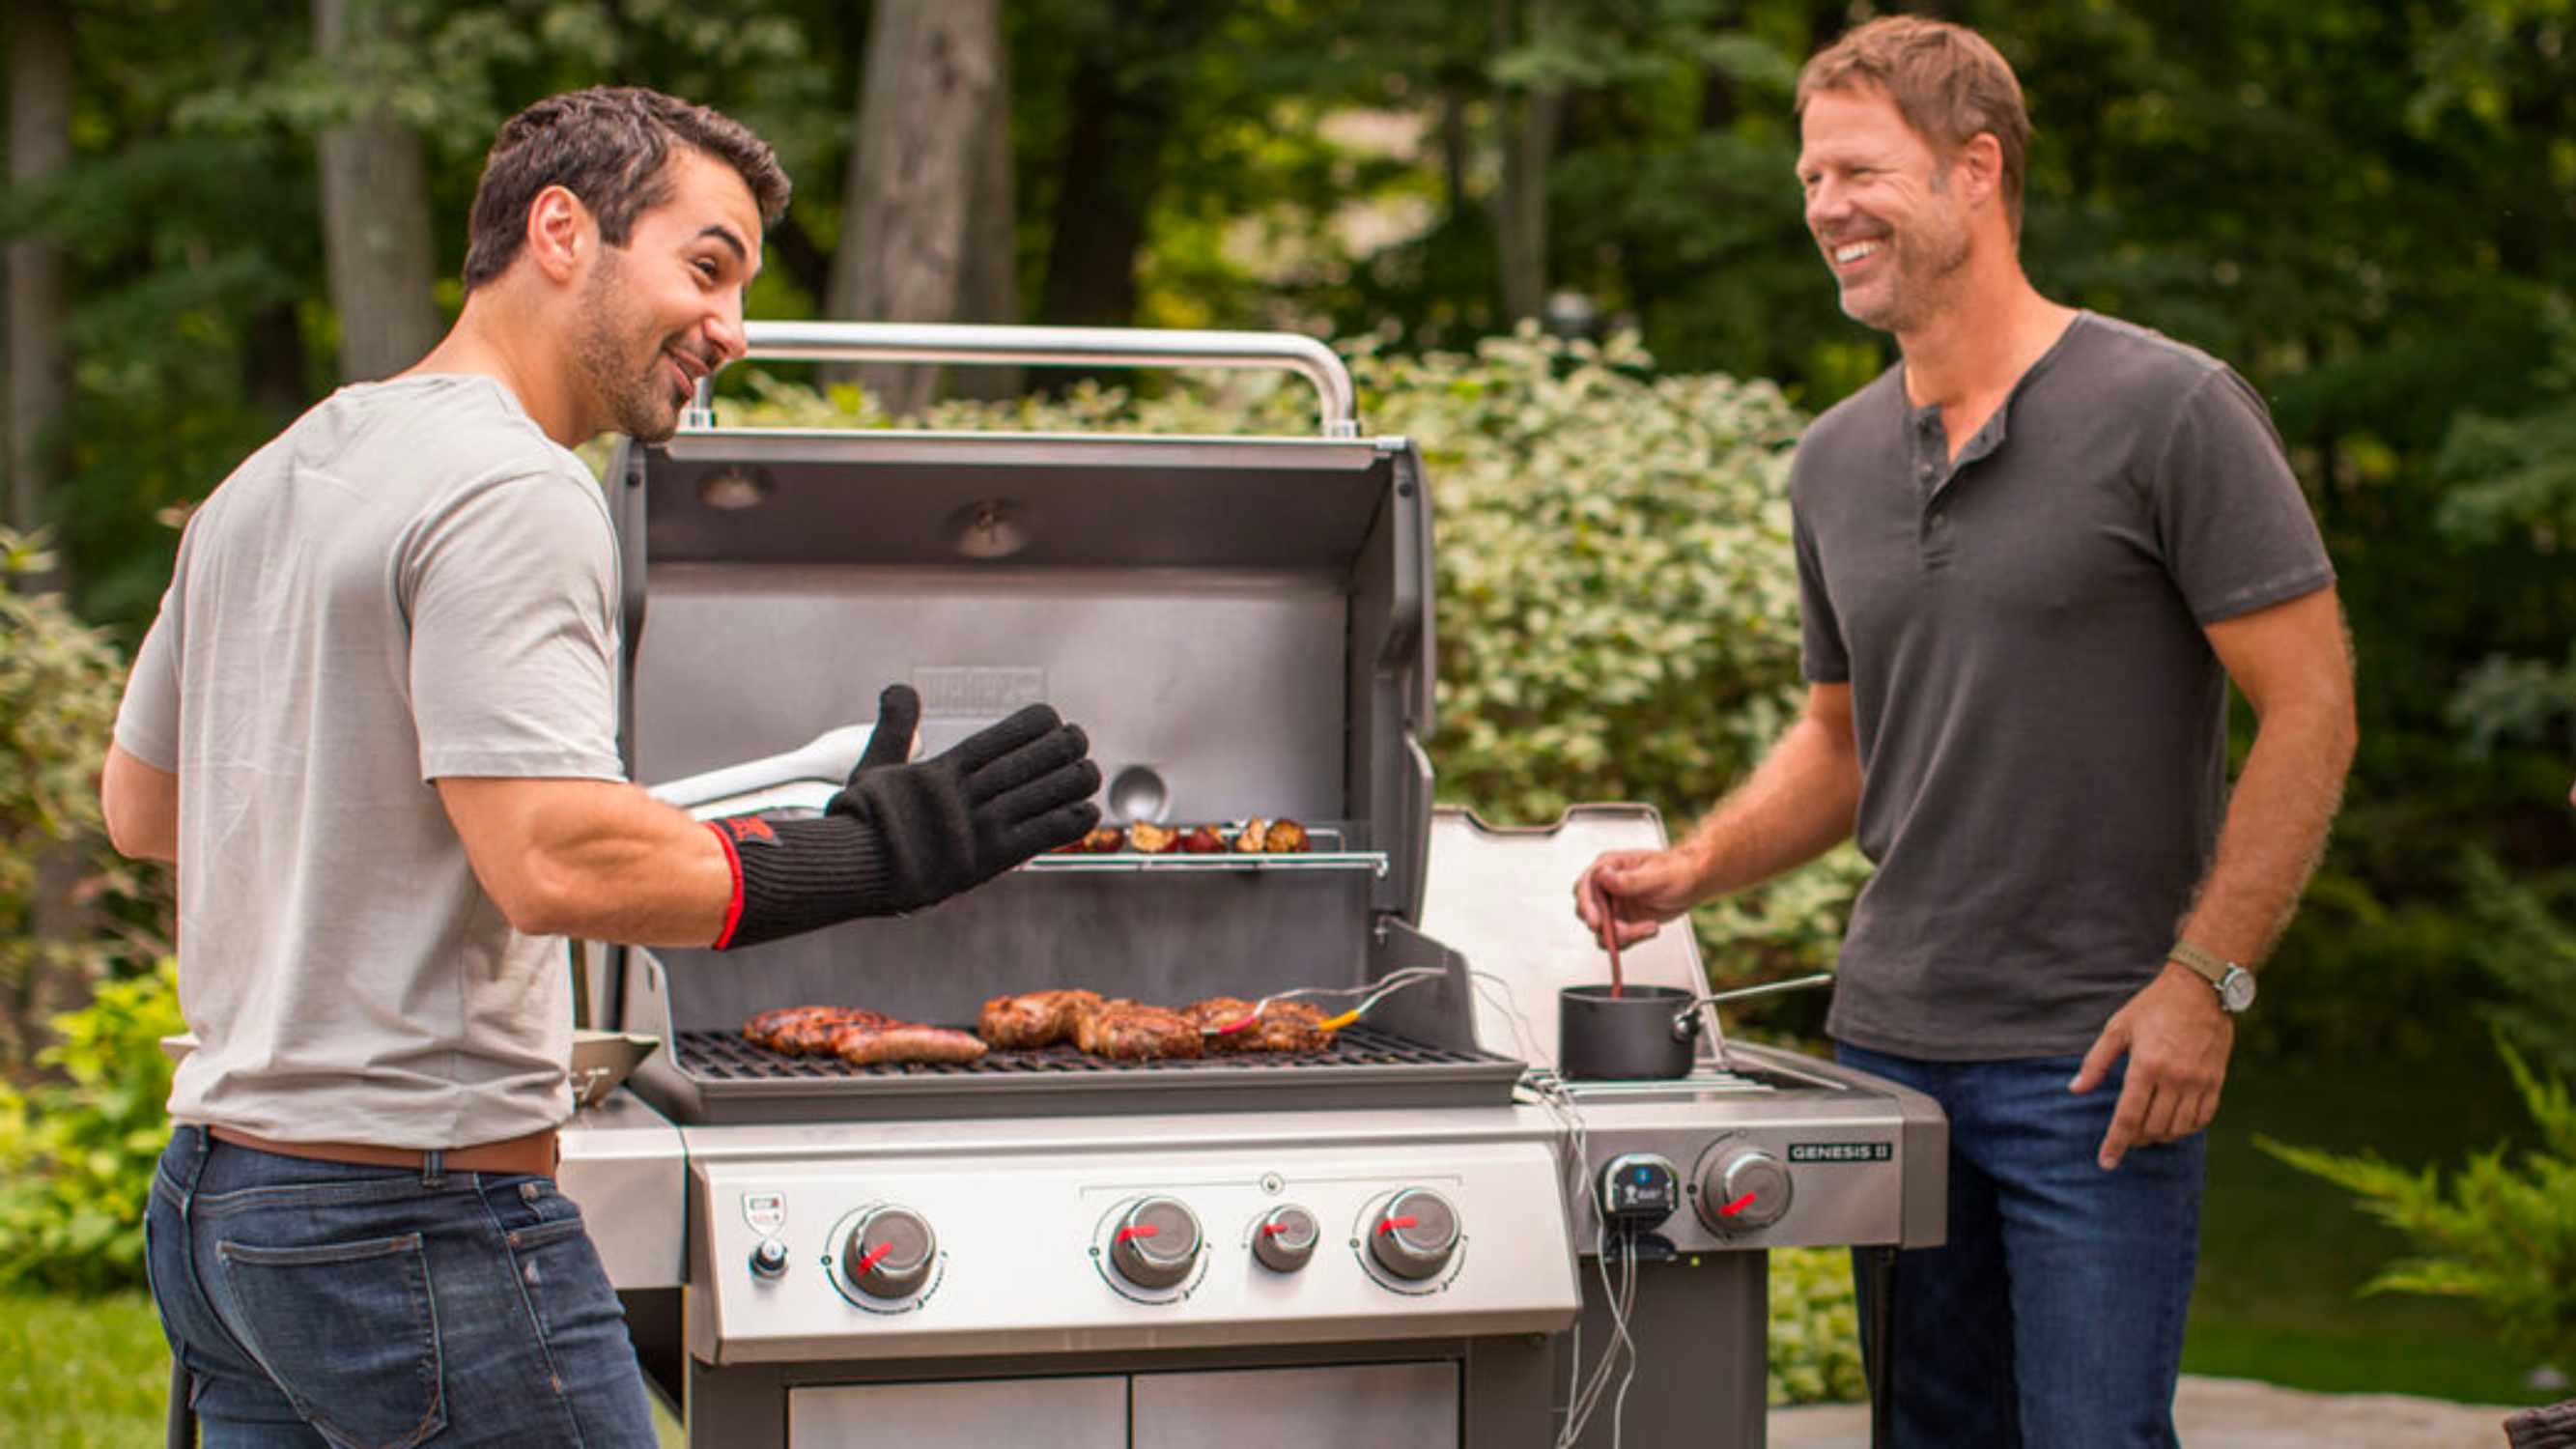 Weber Grills Elevate Your Outdoor Cooking Experience with Premium Gas Grills - Meat King HK